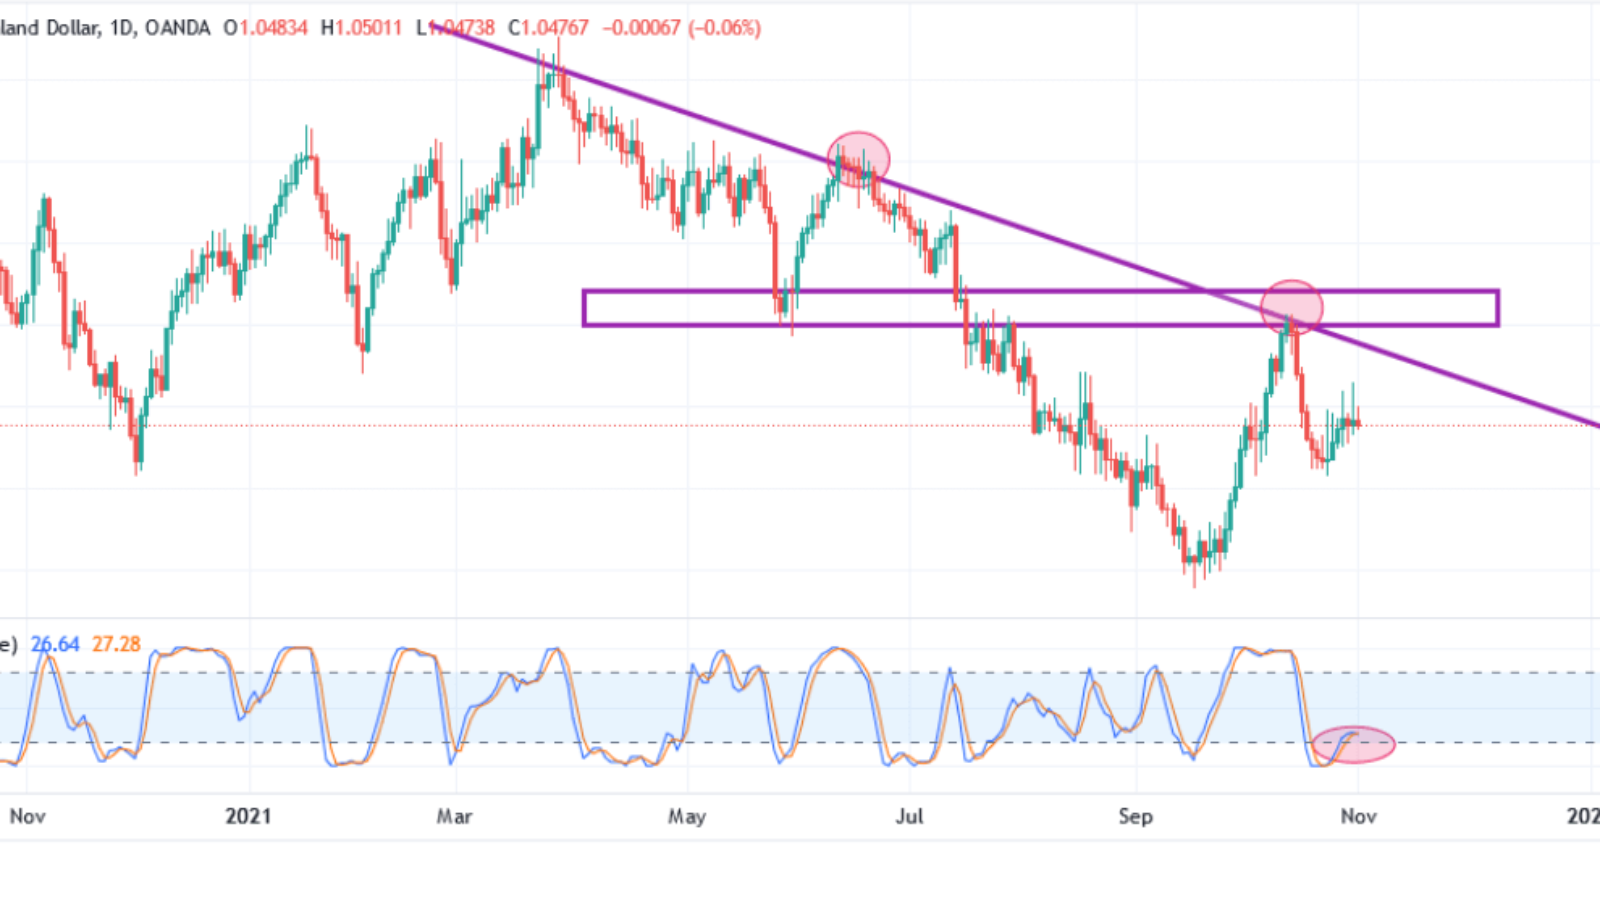 AUD/NZD DAILY FOREX CHART